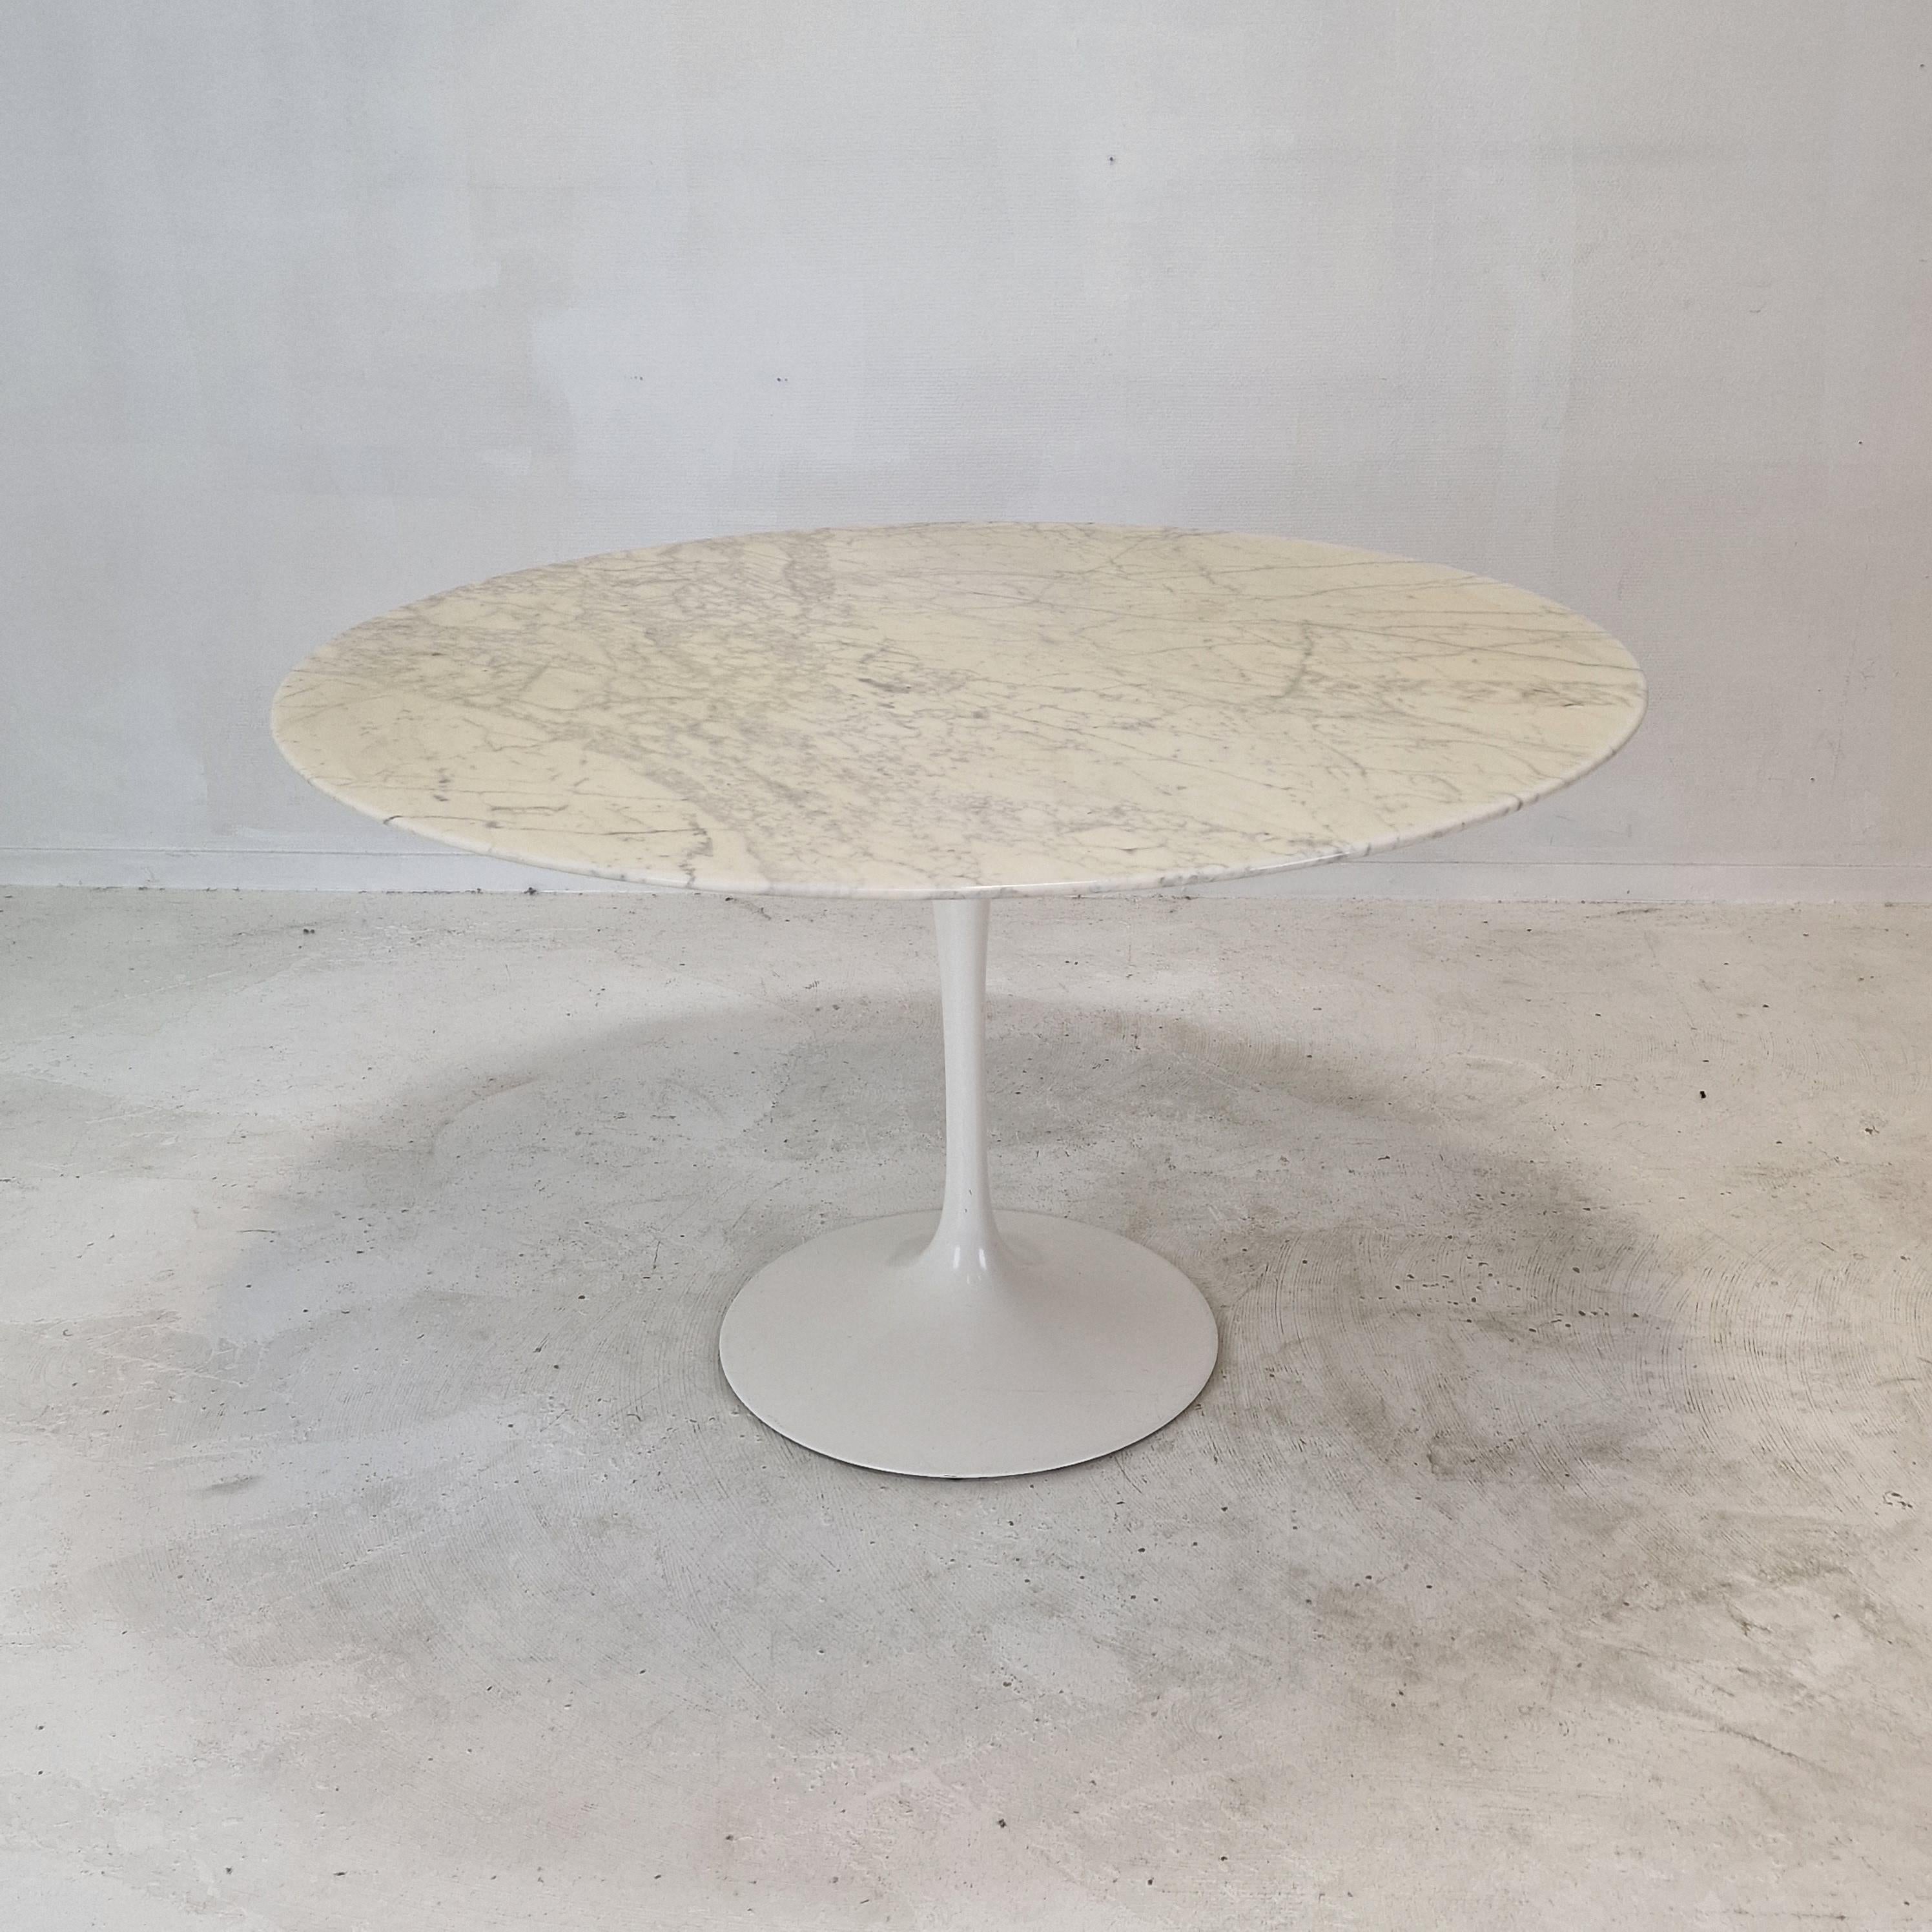 Italian Knoll Marble Dining Table With 5 Chairs by Eero Saarinen, 1960s For Sale